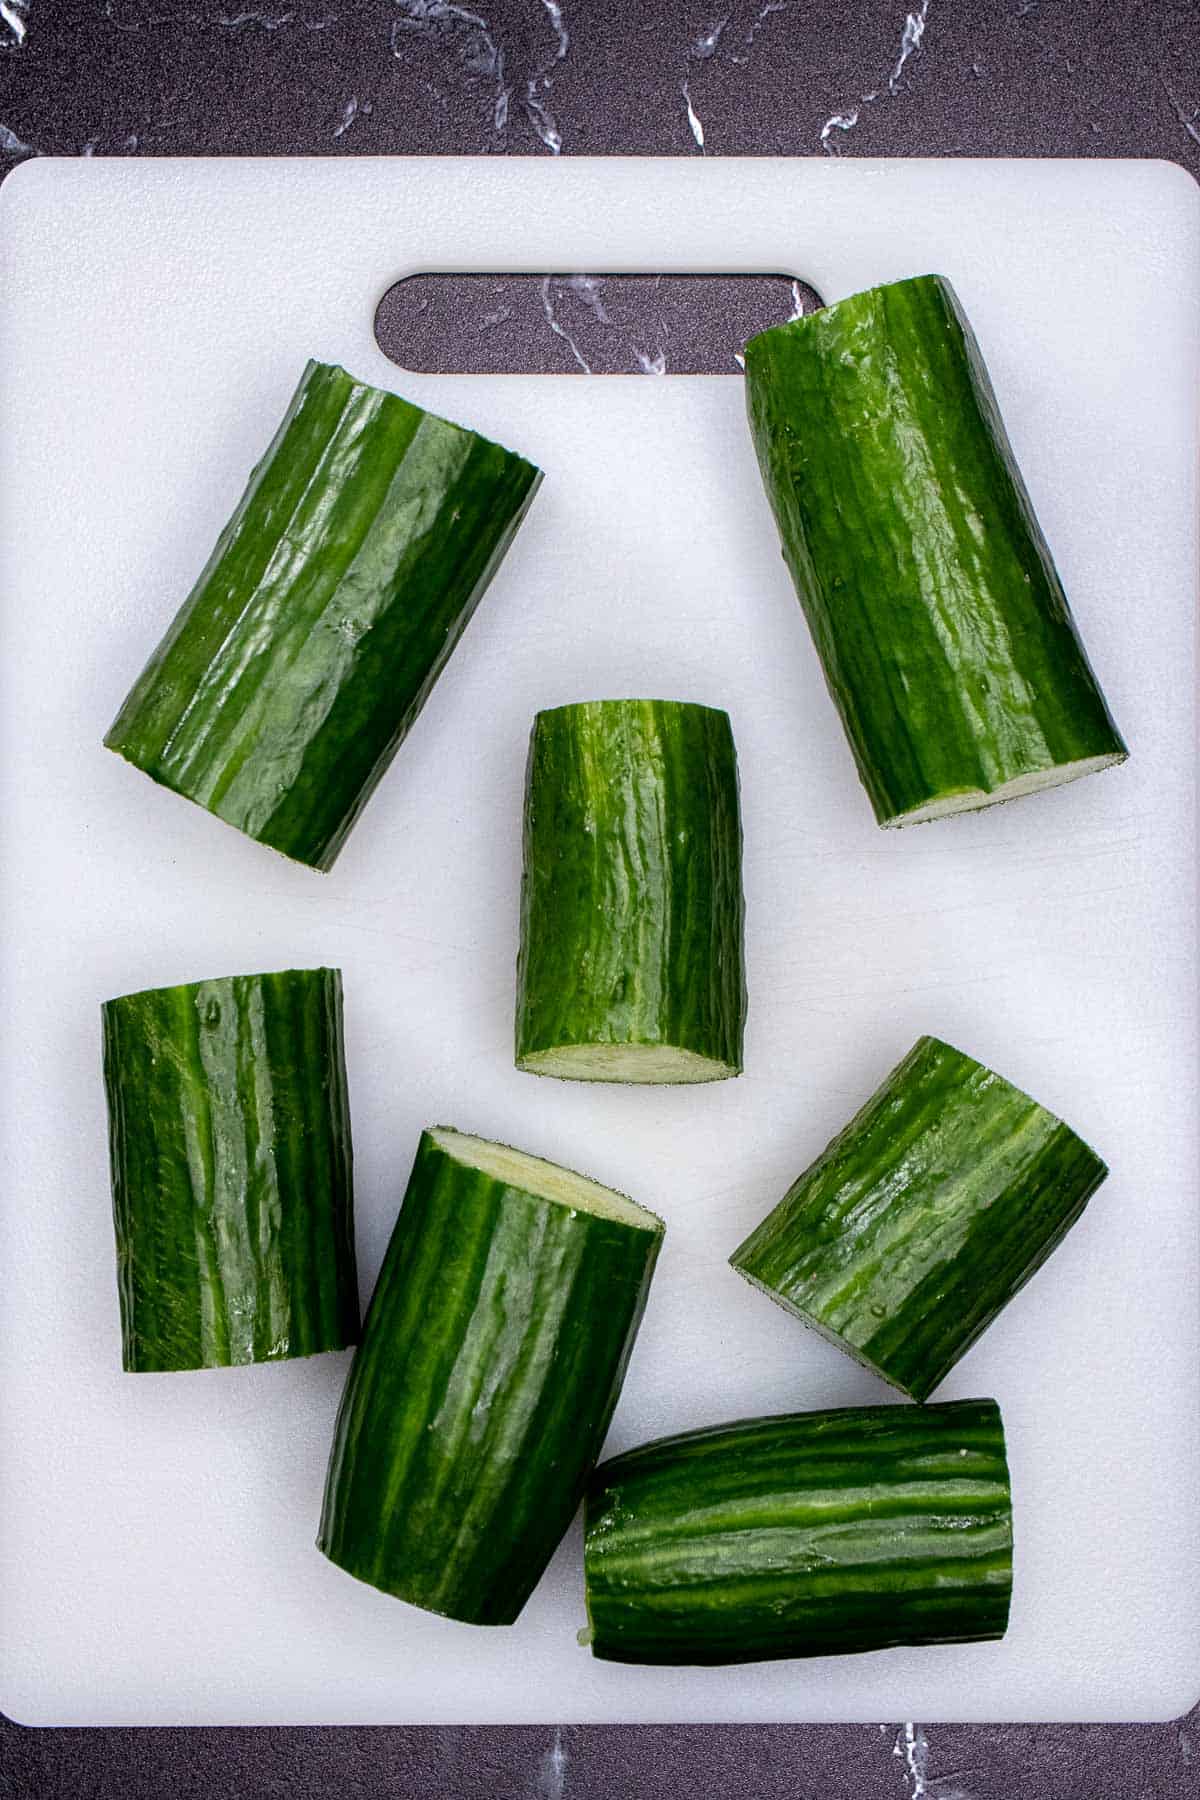 English cucumbers trimmed and cut into 3-4" segments.